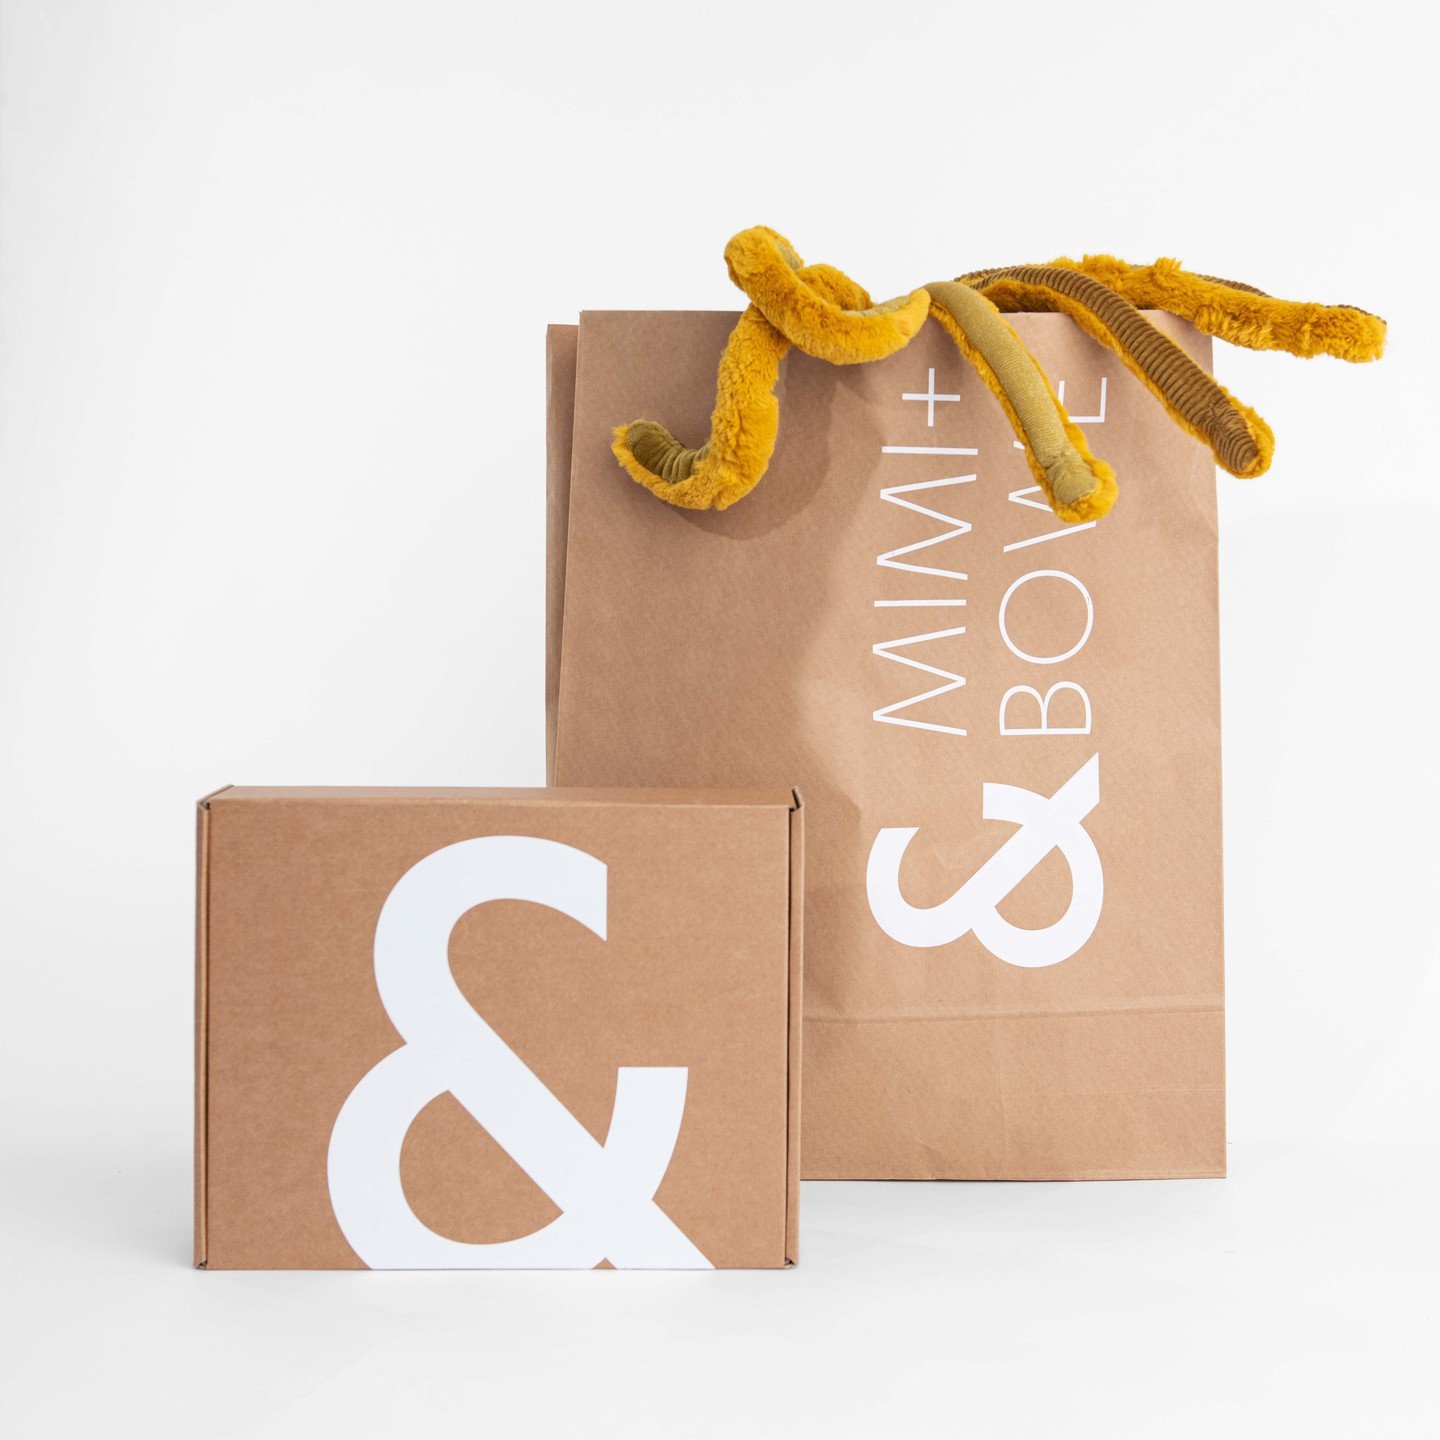 We believe that every gift should start with great packaging. The whole experience from start to finish has been carefully considered.All our gift boxes and packaging are recyclable and made in Europe. Each box comes in our branded biodegradable mail